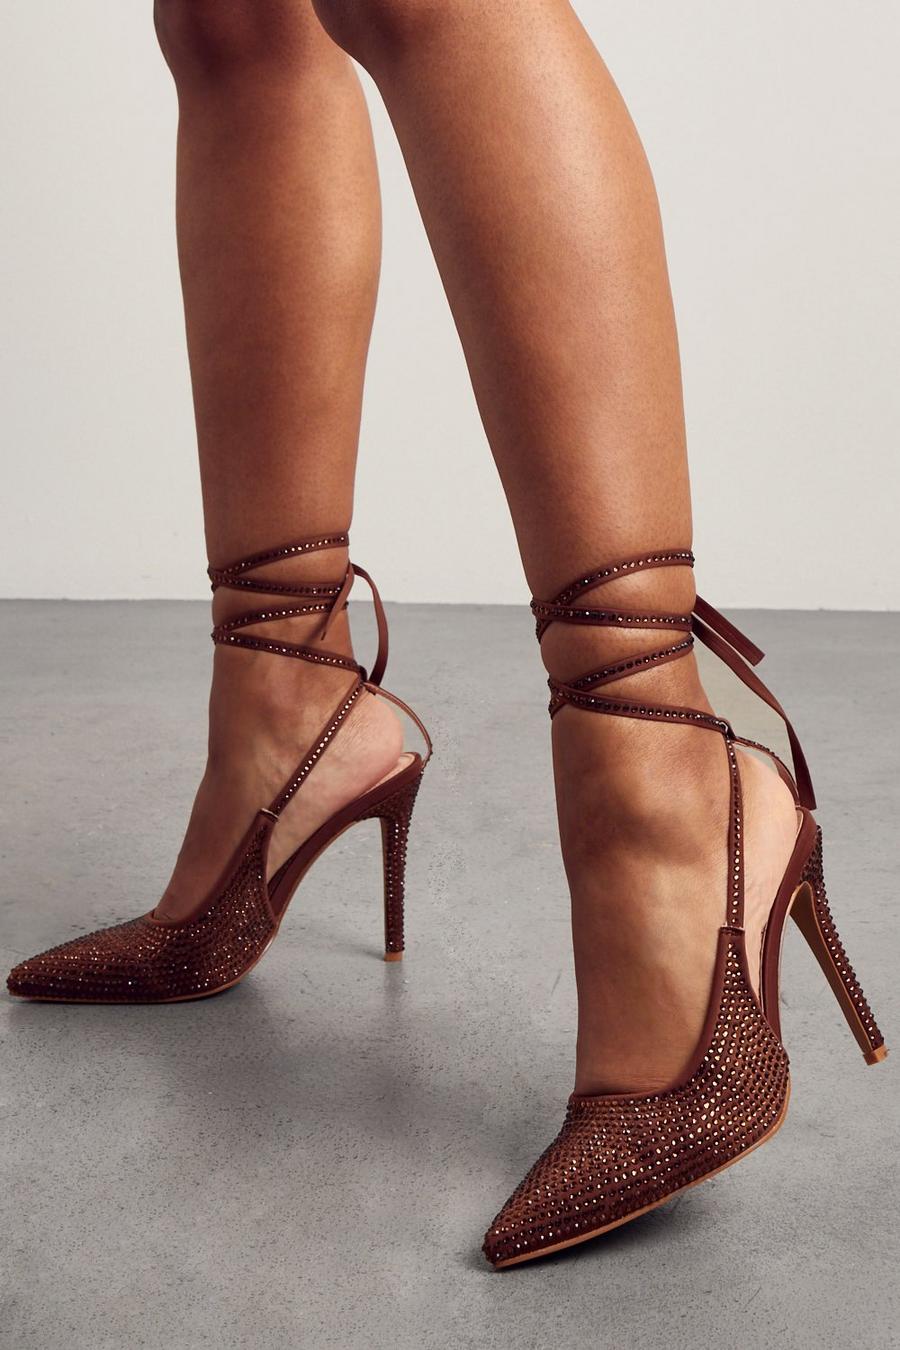 Chocolate brown Diamante Embellished Strappy High Heels 